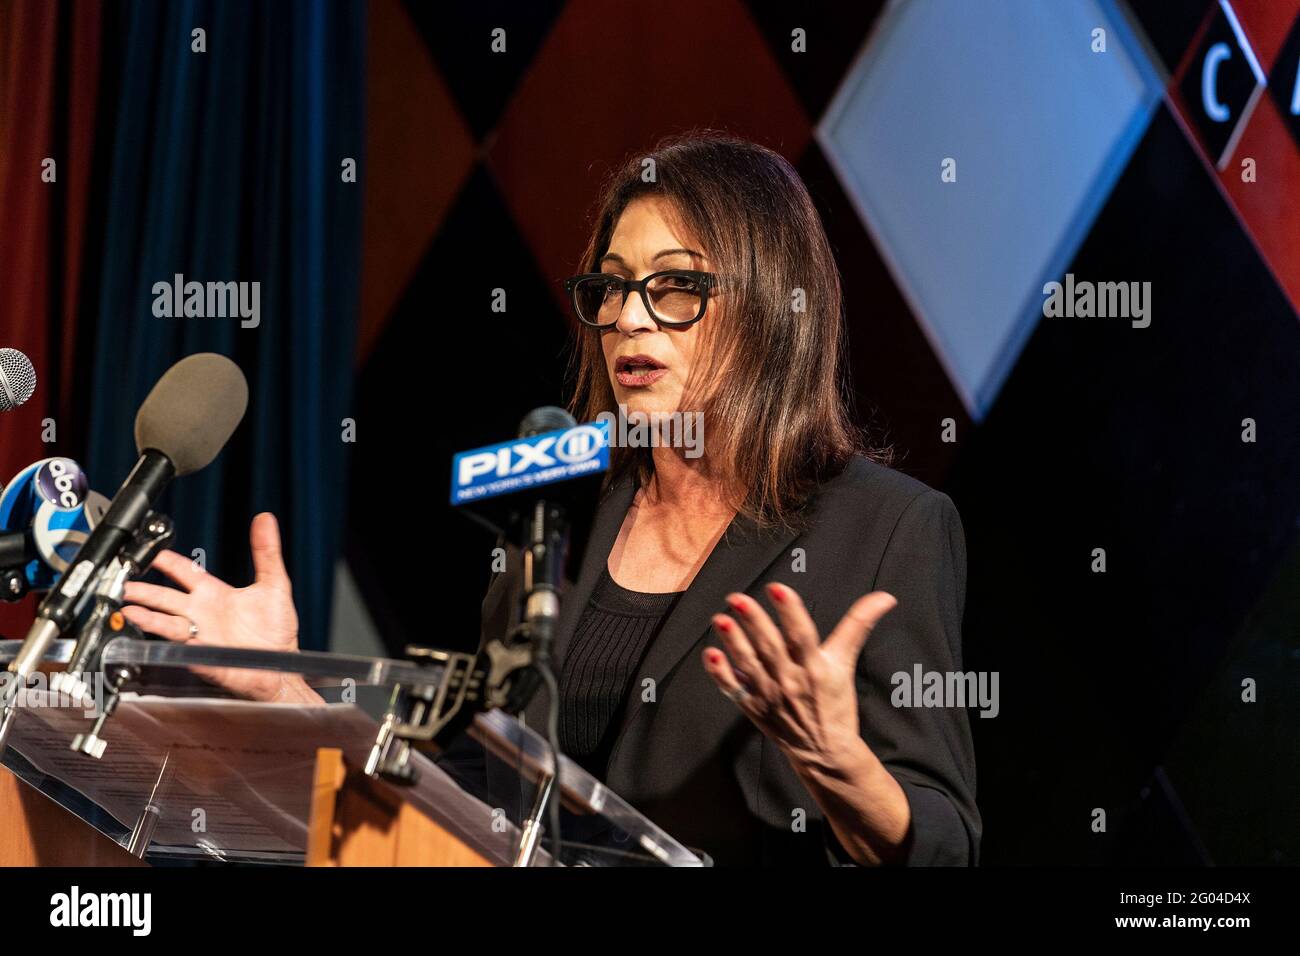 New York, United States. 31st May, 2021. Caroline Hirsch speaks at Carolines on Broadway comedy club re-opening after pandemic ceremony with U. S. Senator Charles Schumer. Senator Charles Schumer and Caroline Hirsch lauded Safe our Stages bill passed by Senate to help cultural venues to survive pandemic. (Photo by Lev Radin/Pacific Press) Credit: Pacific Press Media Production Corp./Alamy Live News Stock Photo